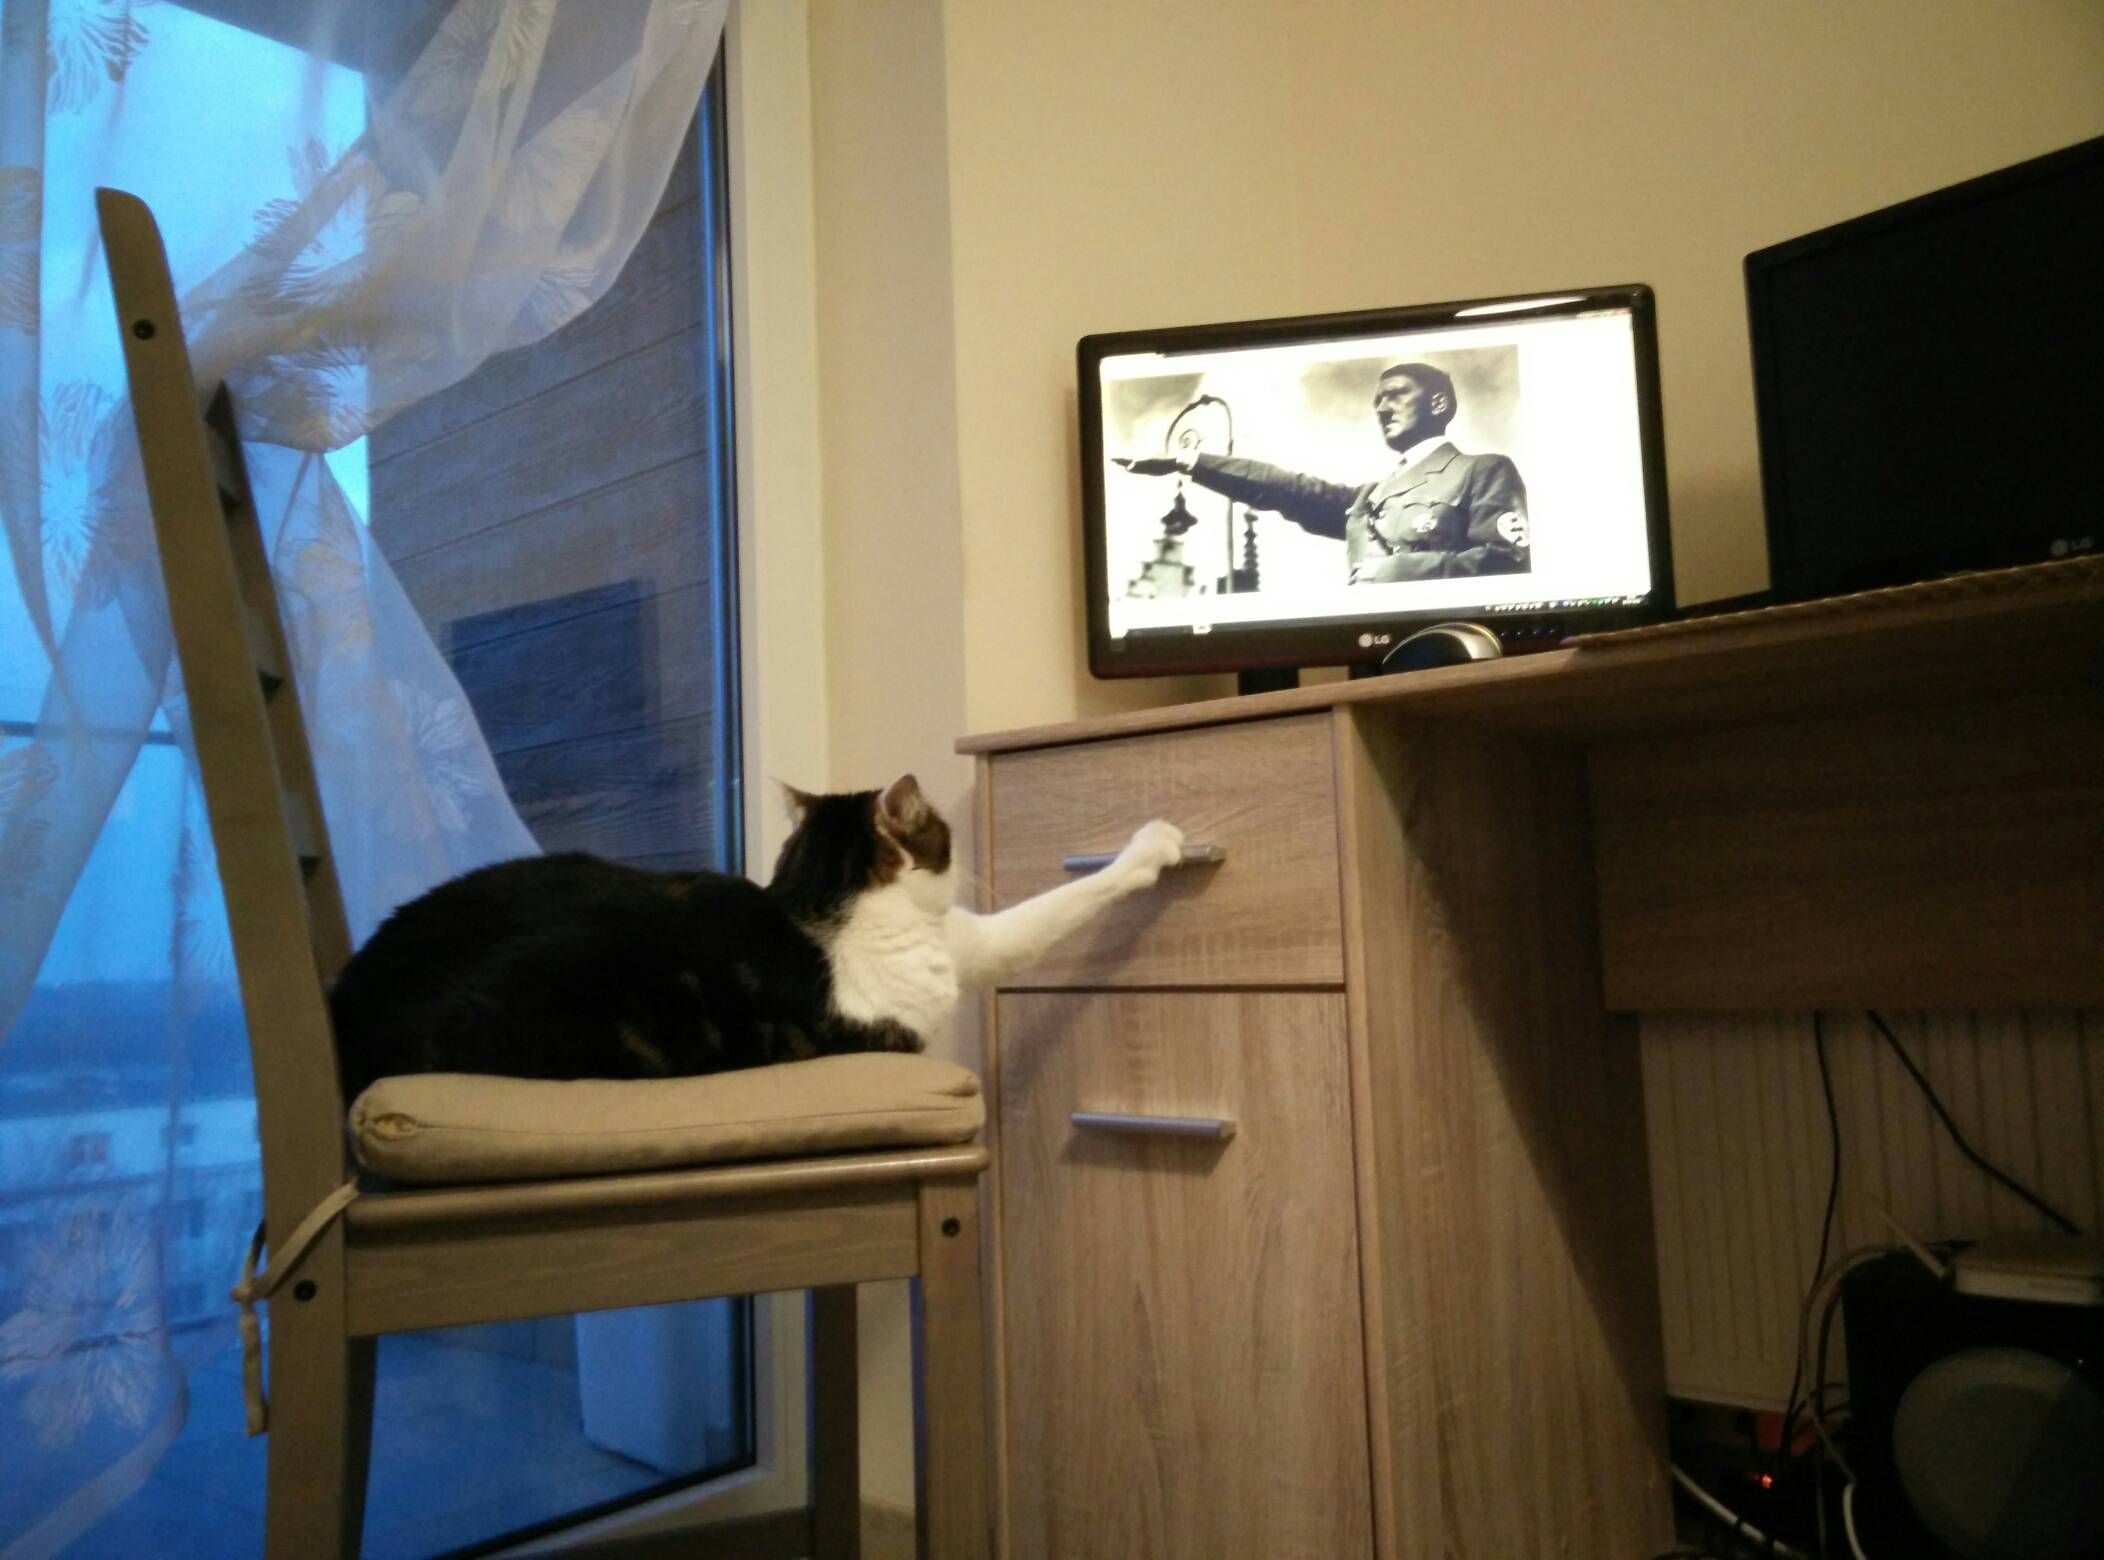 And that's why you don't leave your cat alone with the computer